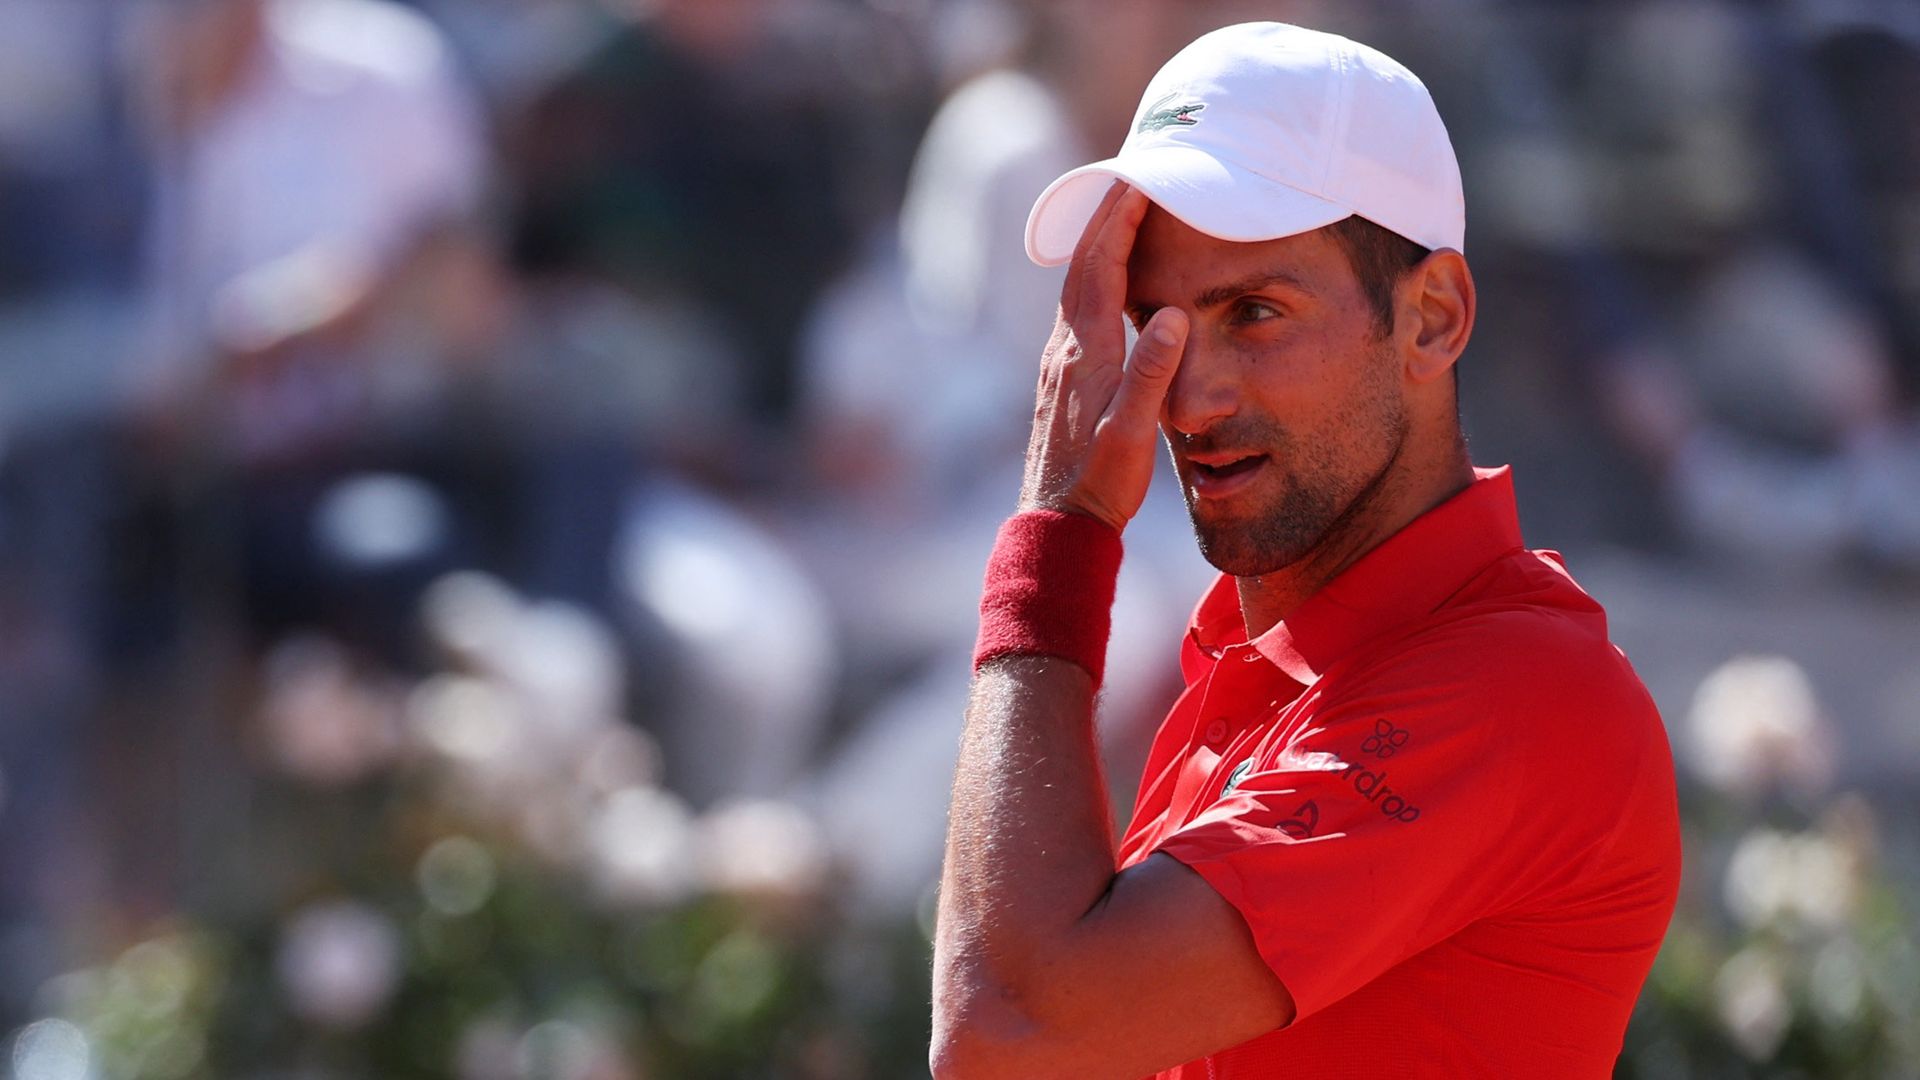 'Nausea, dizziness, blood': Djokovic to have tests after bottle strike and shock loss